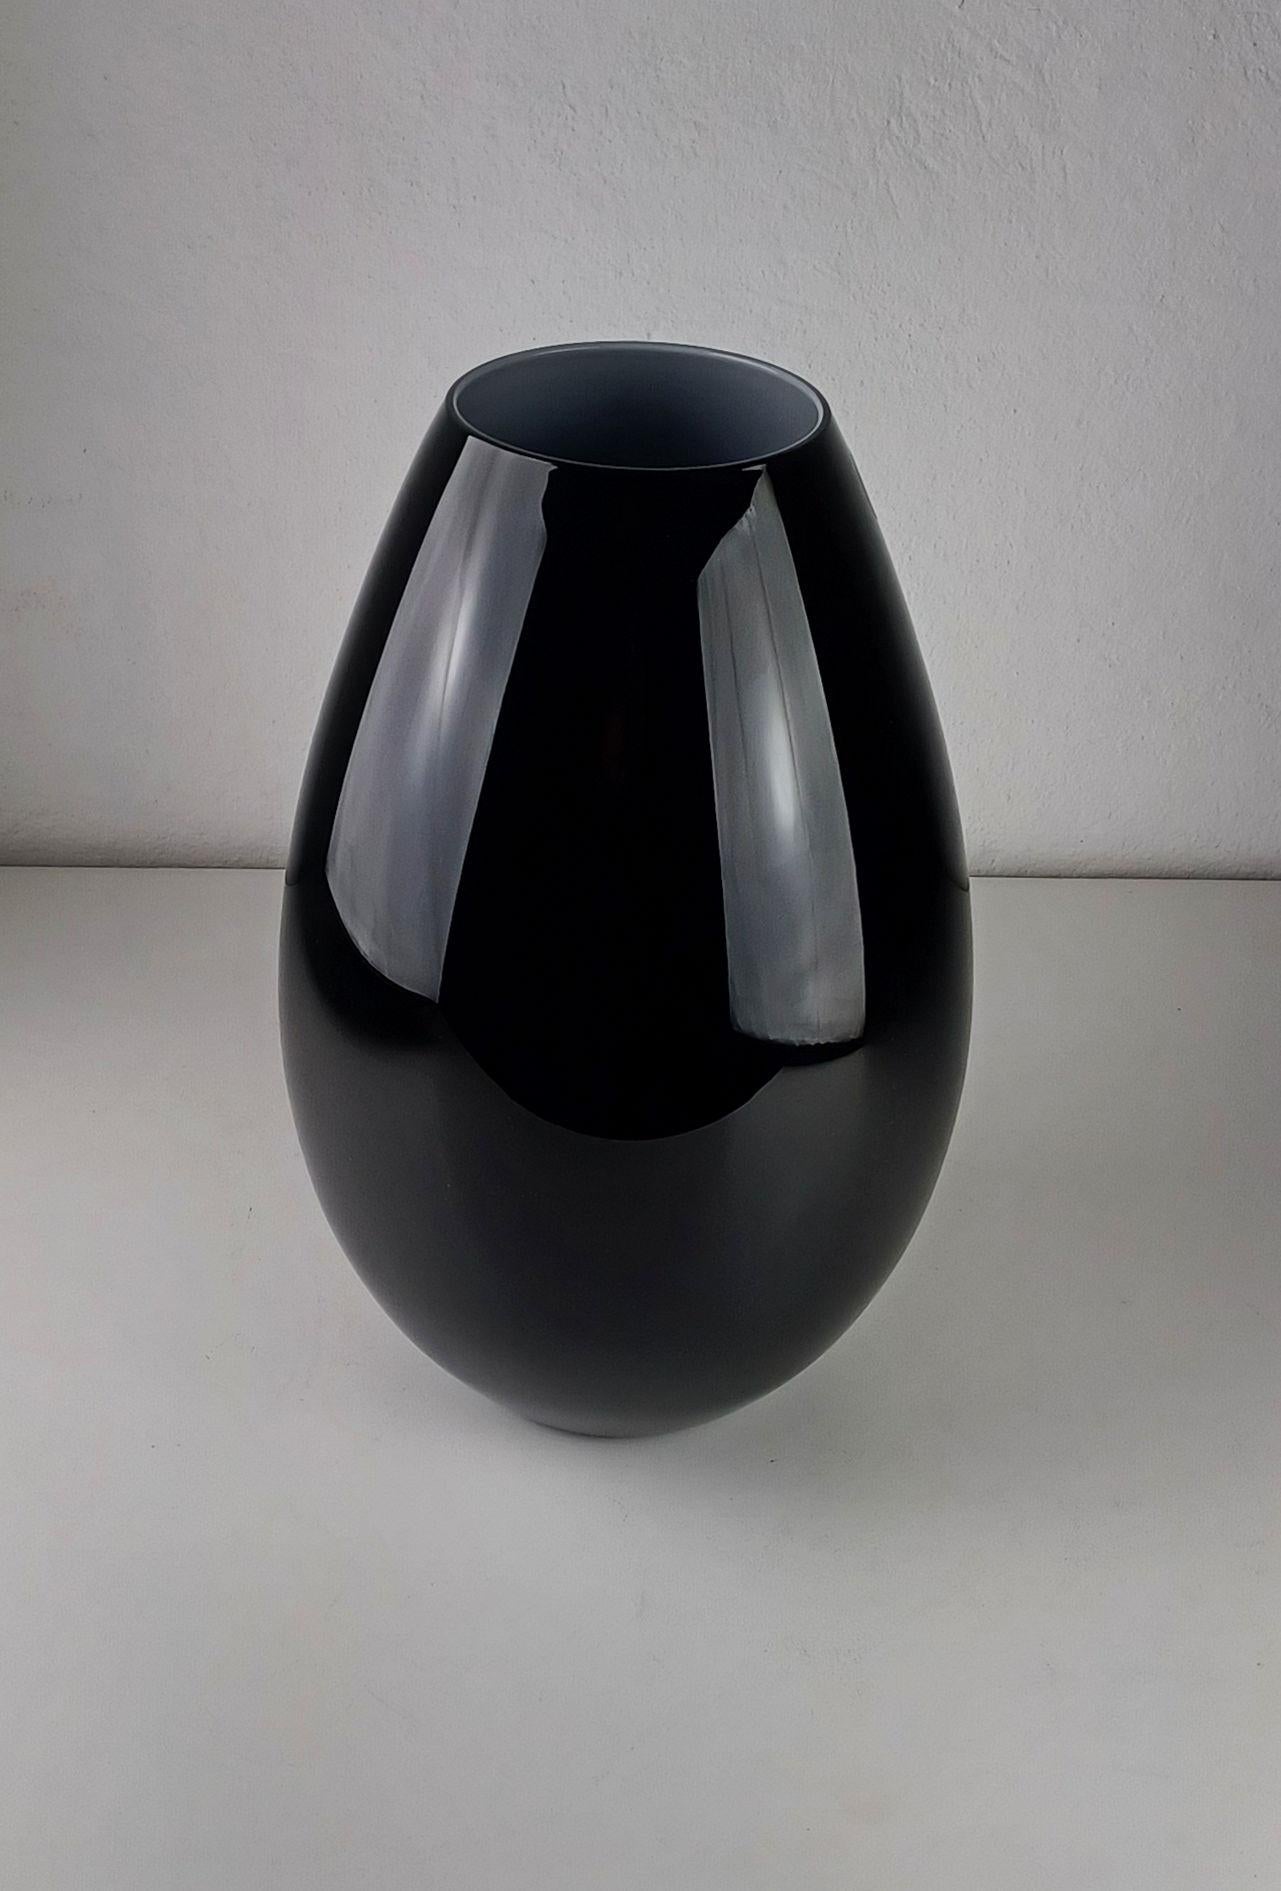 2000's Danish Opaline Glass Vase by Peter Svarrer for Holmegaard

The large vase made in mouth blown opaline black and white glass was designed in the beginning of the 21'st. century as part of a large series of vases, bowls and lamps in many colors